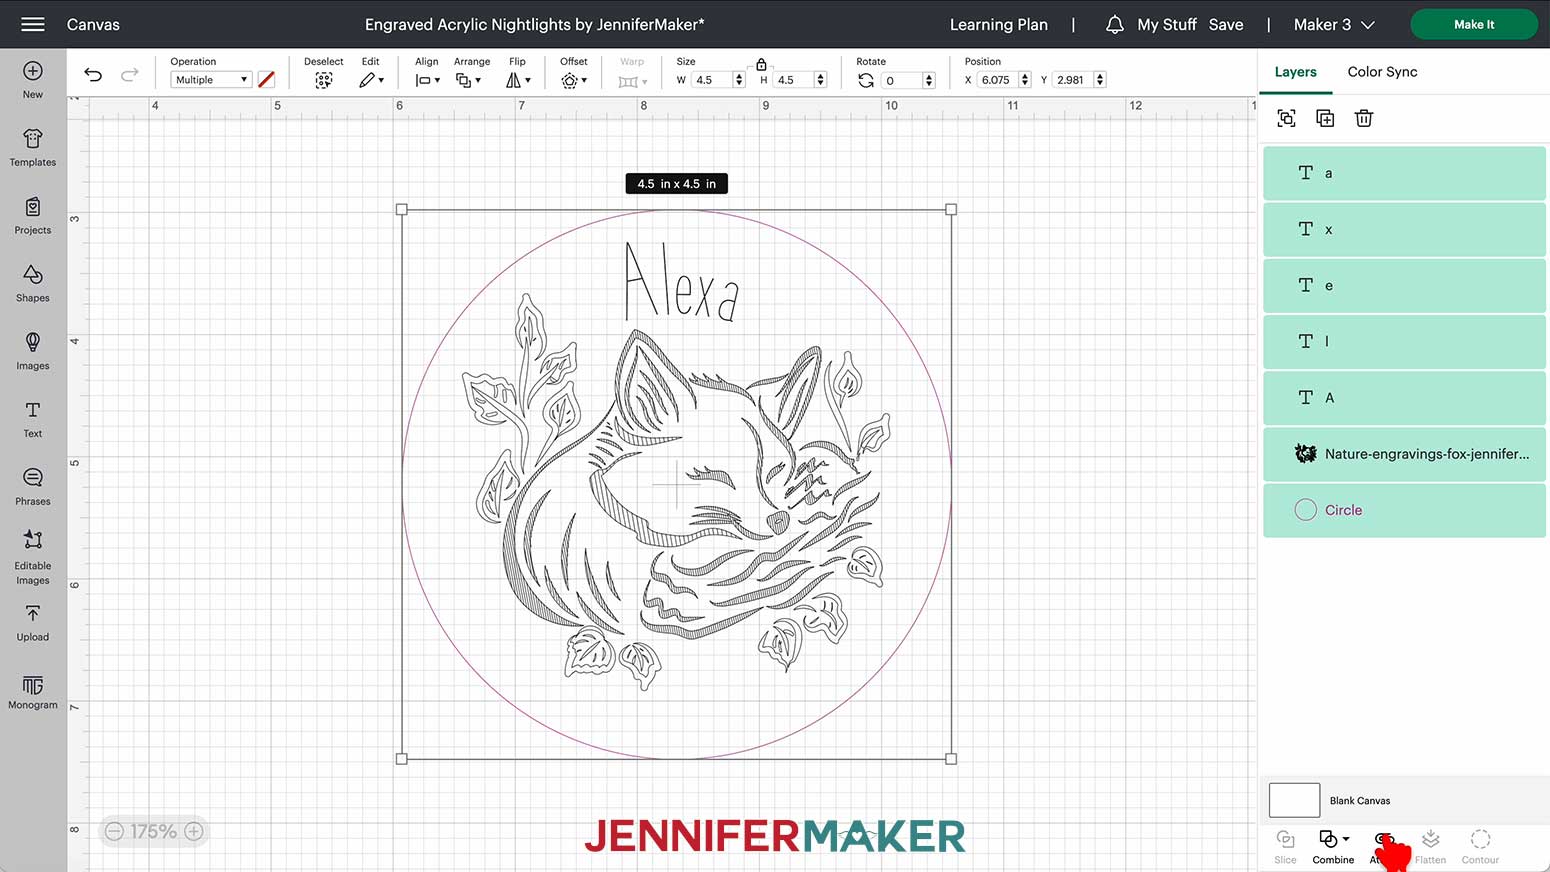 Select the name, guide circle, and design simultaneously and click attach to ensure all elements engrave together.